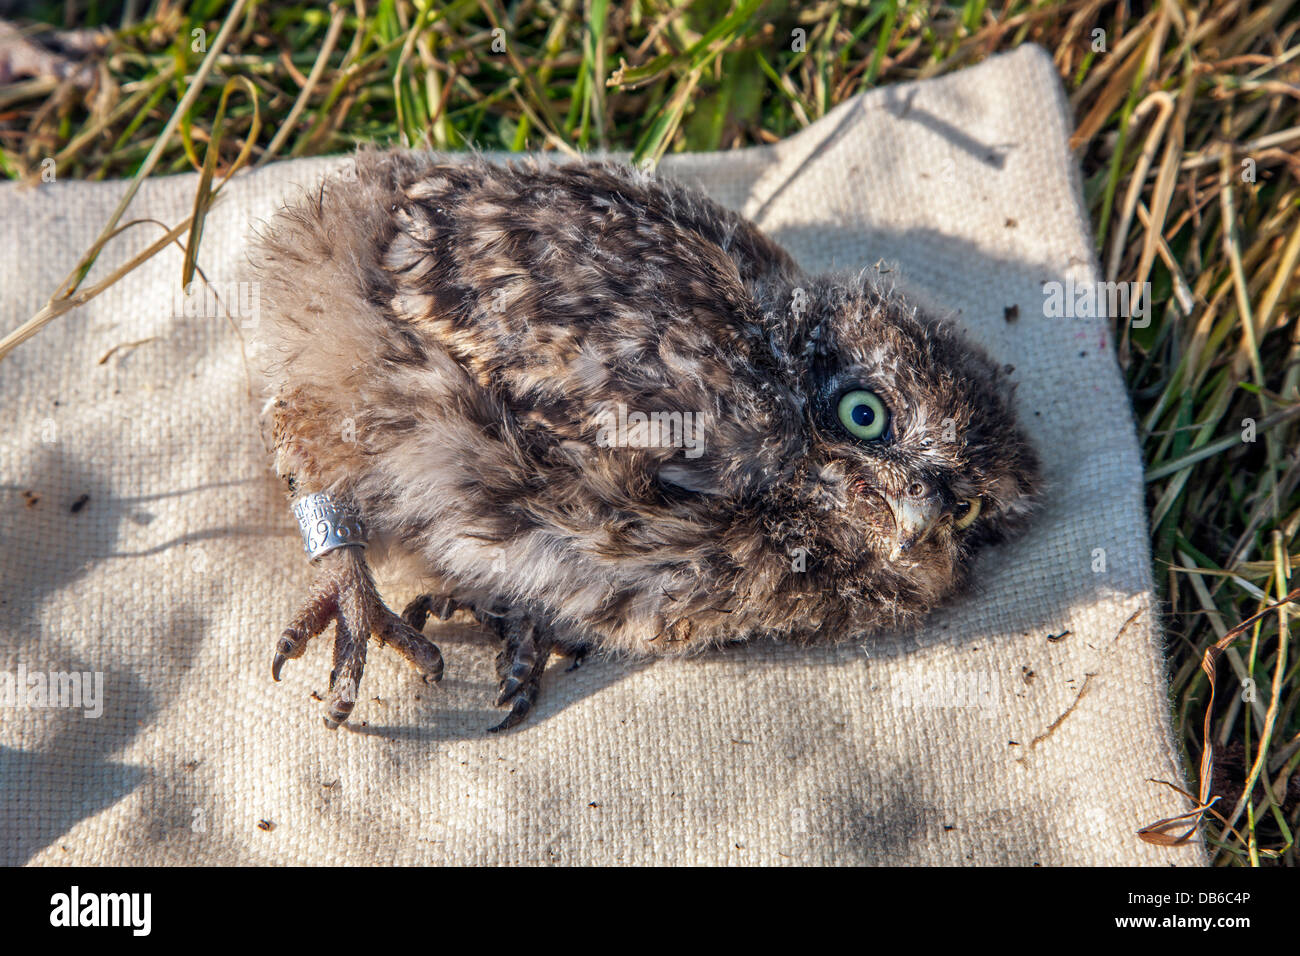 Little Owl (Athene noctua) owlet ringed with metal ring on leg by bird ringer in spring Stock Photo